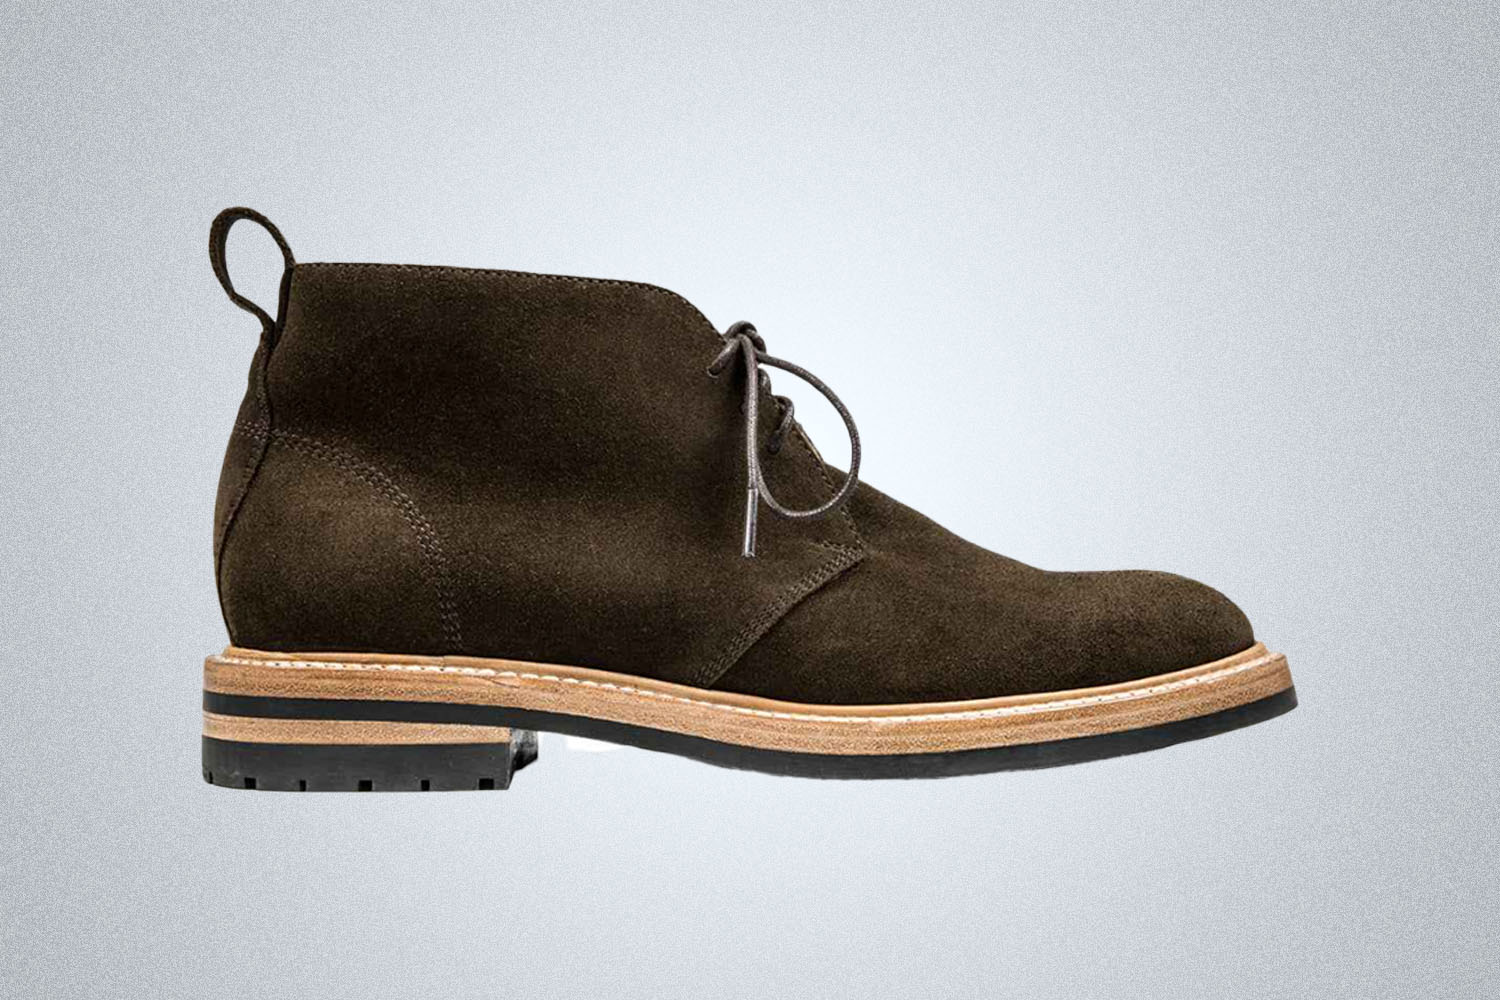 a dark brown suede chukka boot with wooden midsole and vibram rubber sole from Taylor Stitch on a grey background